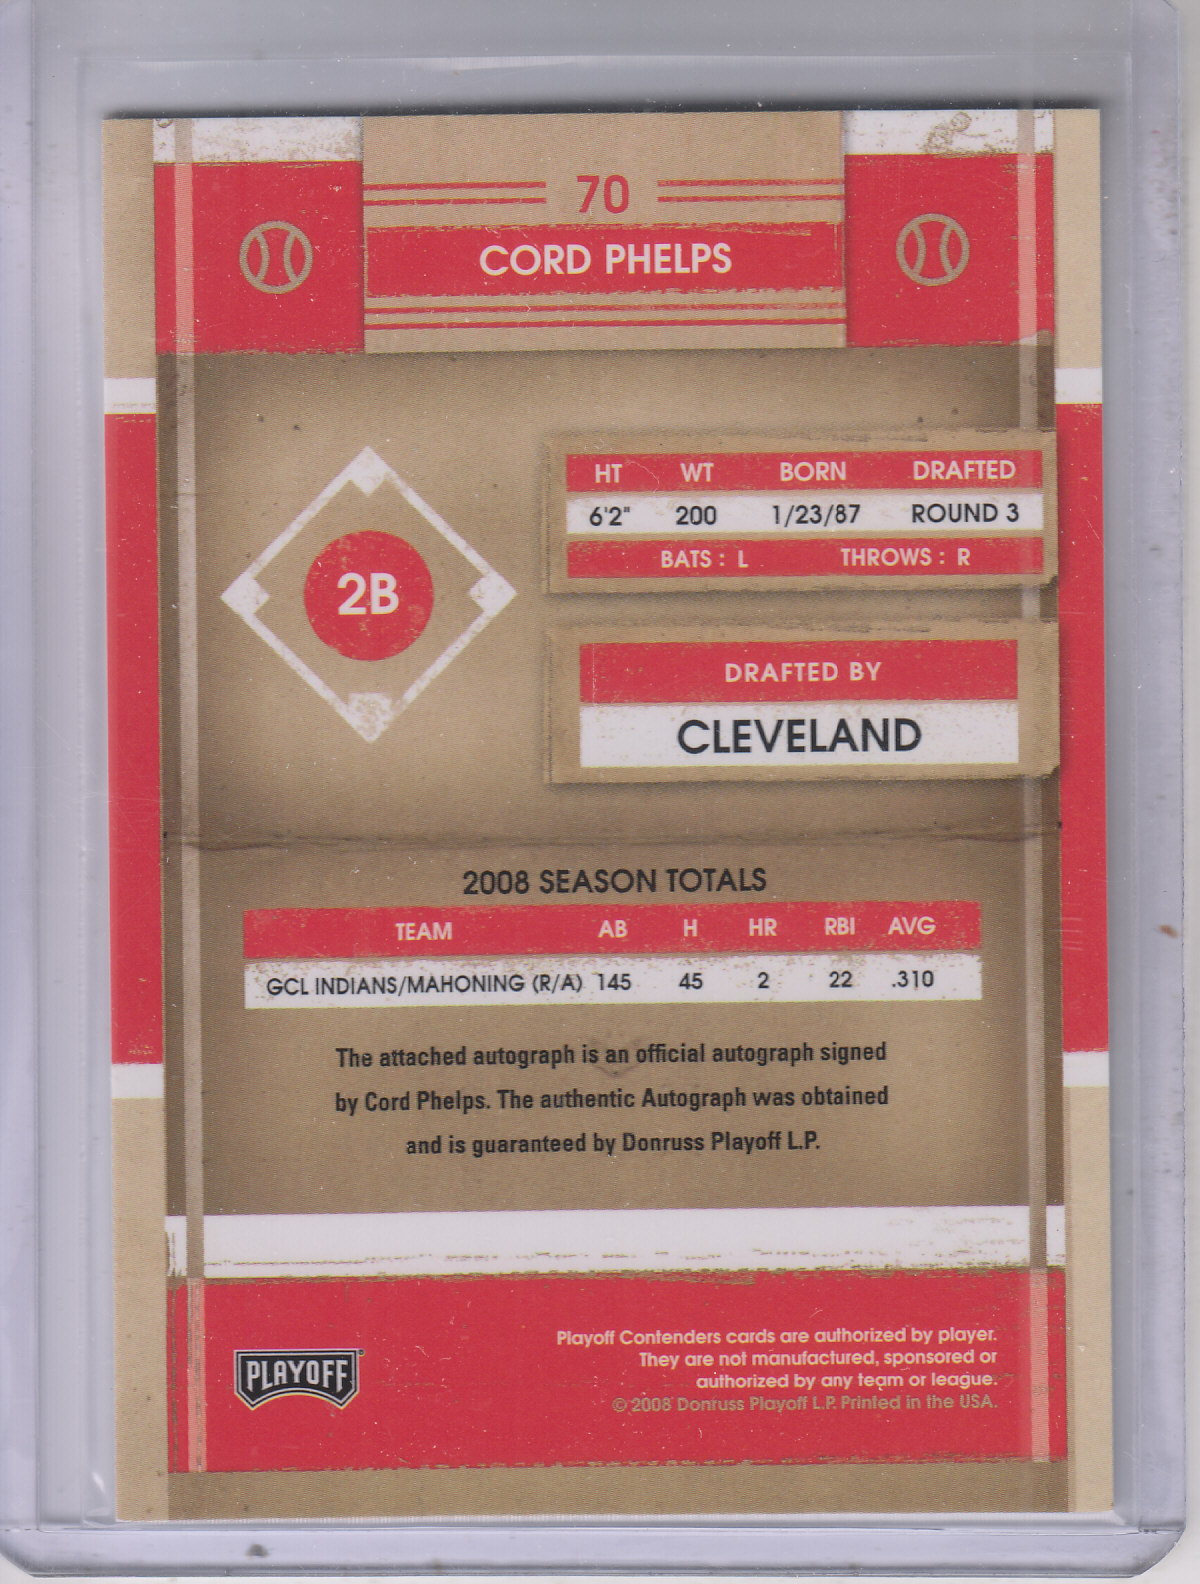 2008 Playoff Contenders #70 Cord Phelps AU/244 * back image